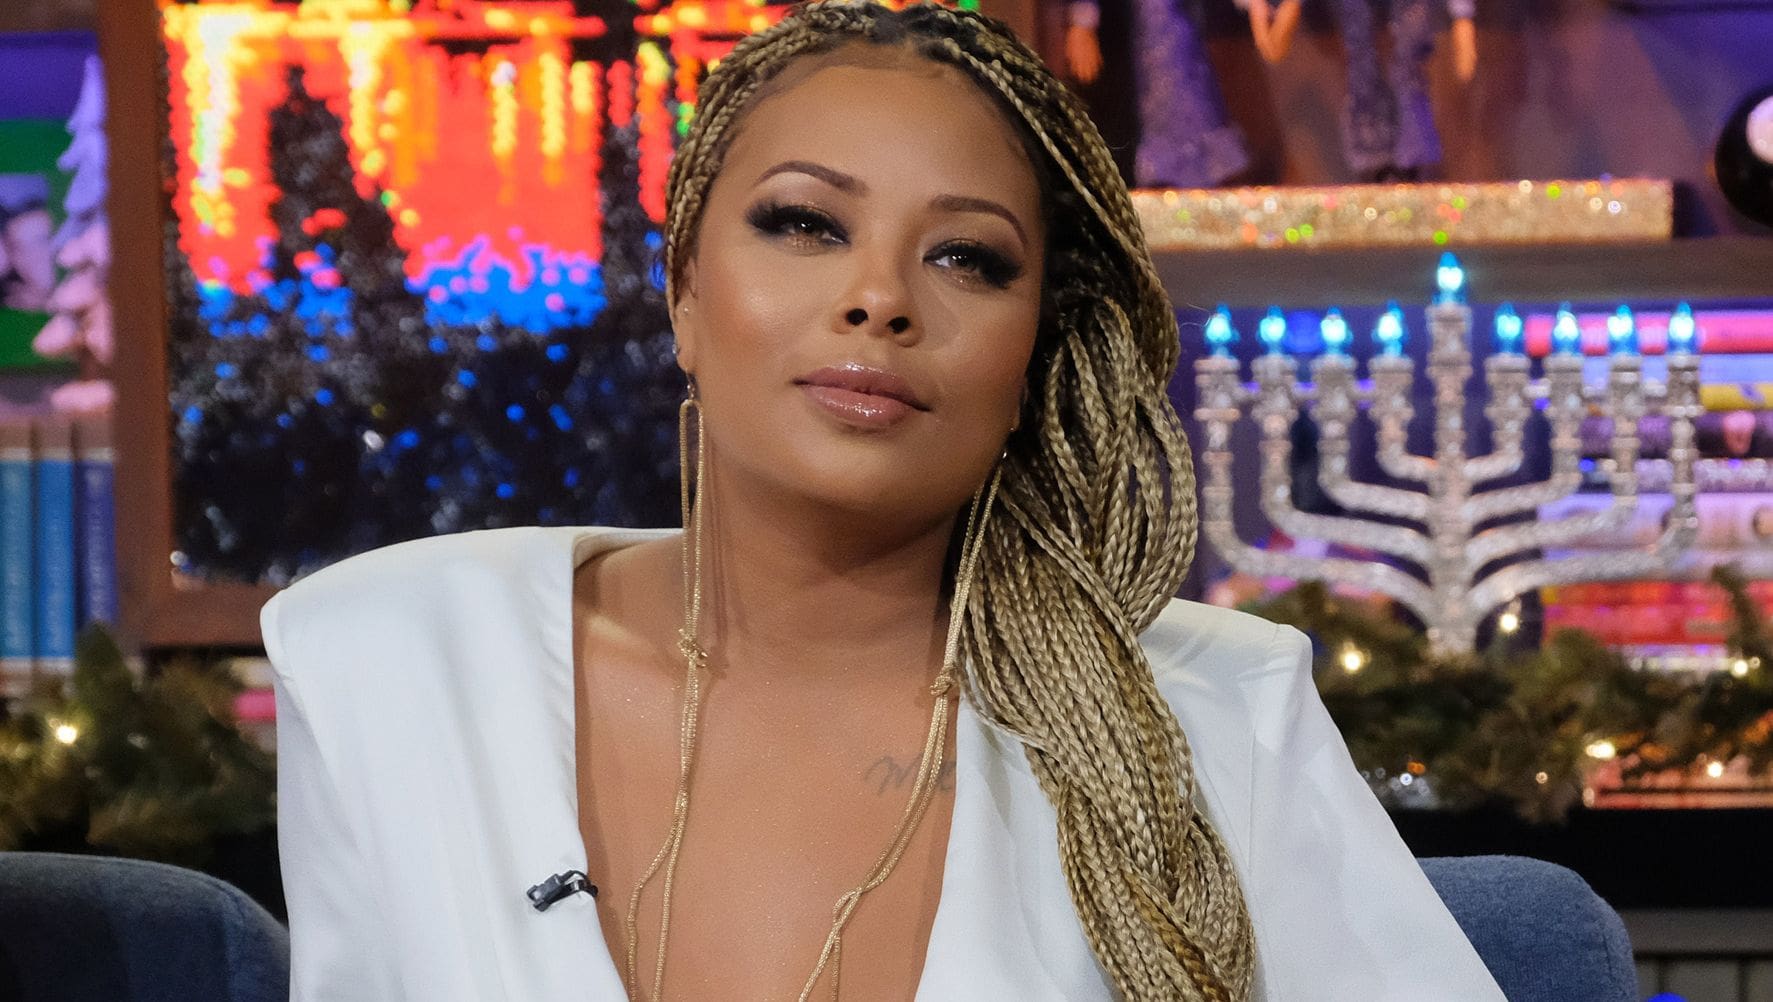 Eva Marcille Has A Natural Alternative For Your Overall Health - Here's How You Can Boost Your Immune System These Days